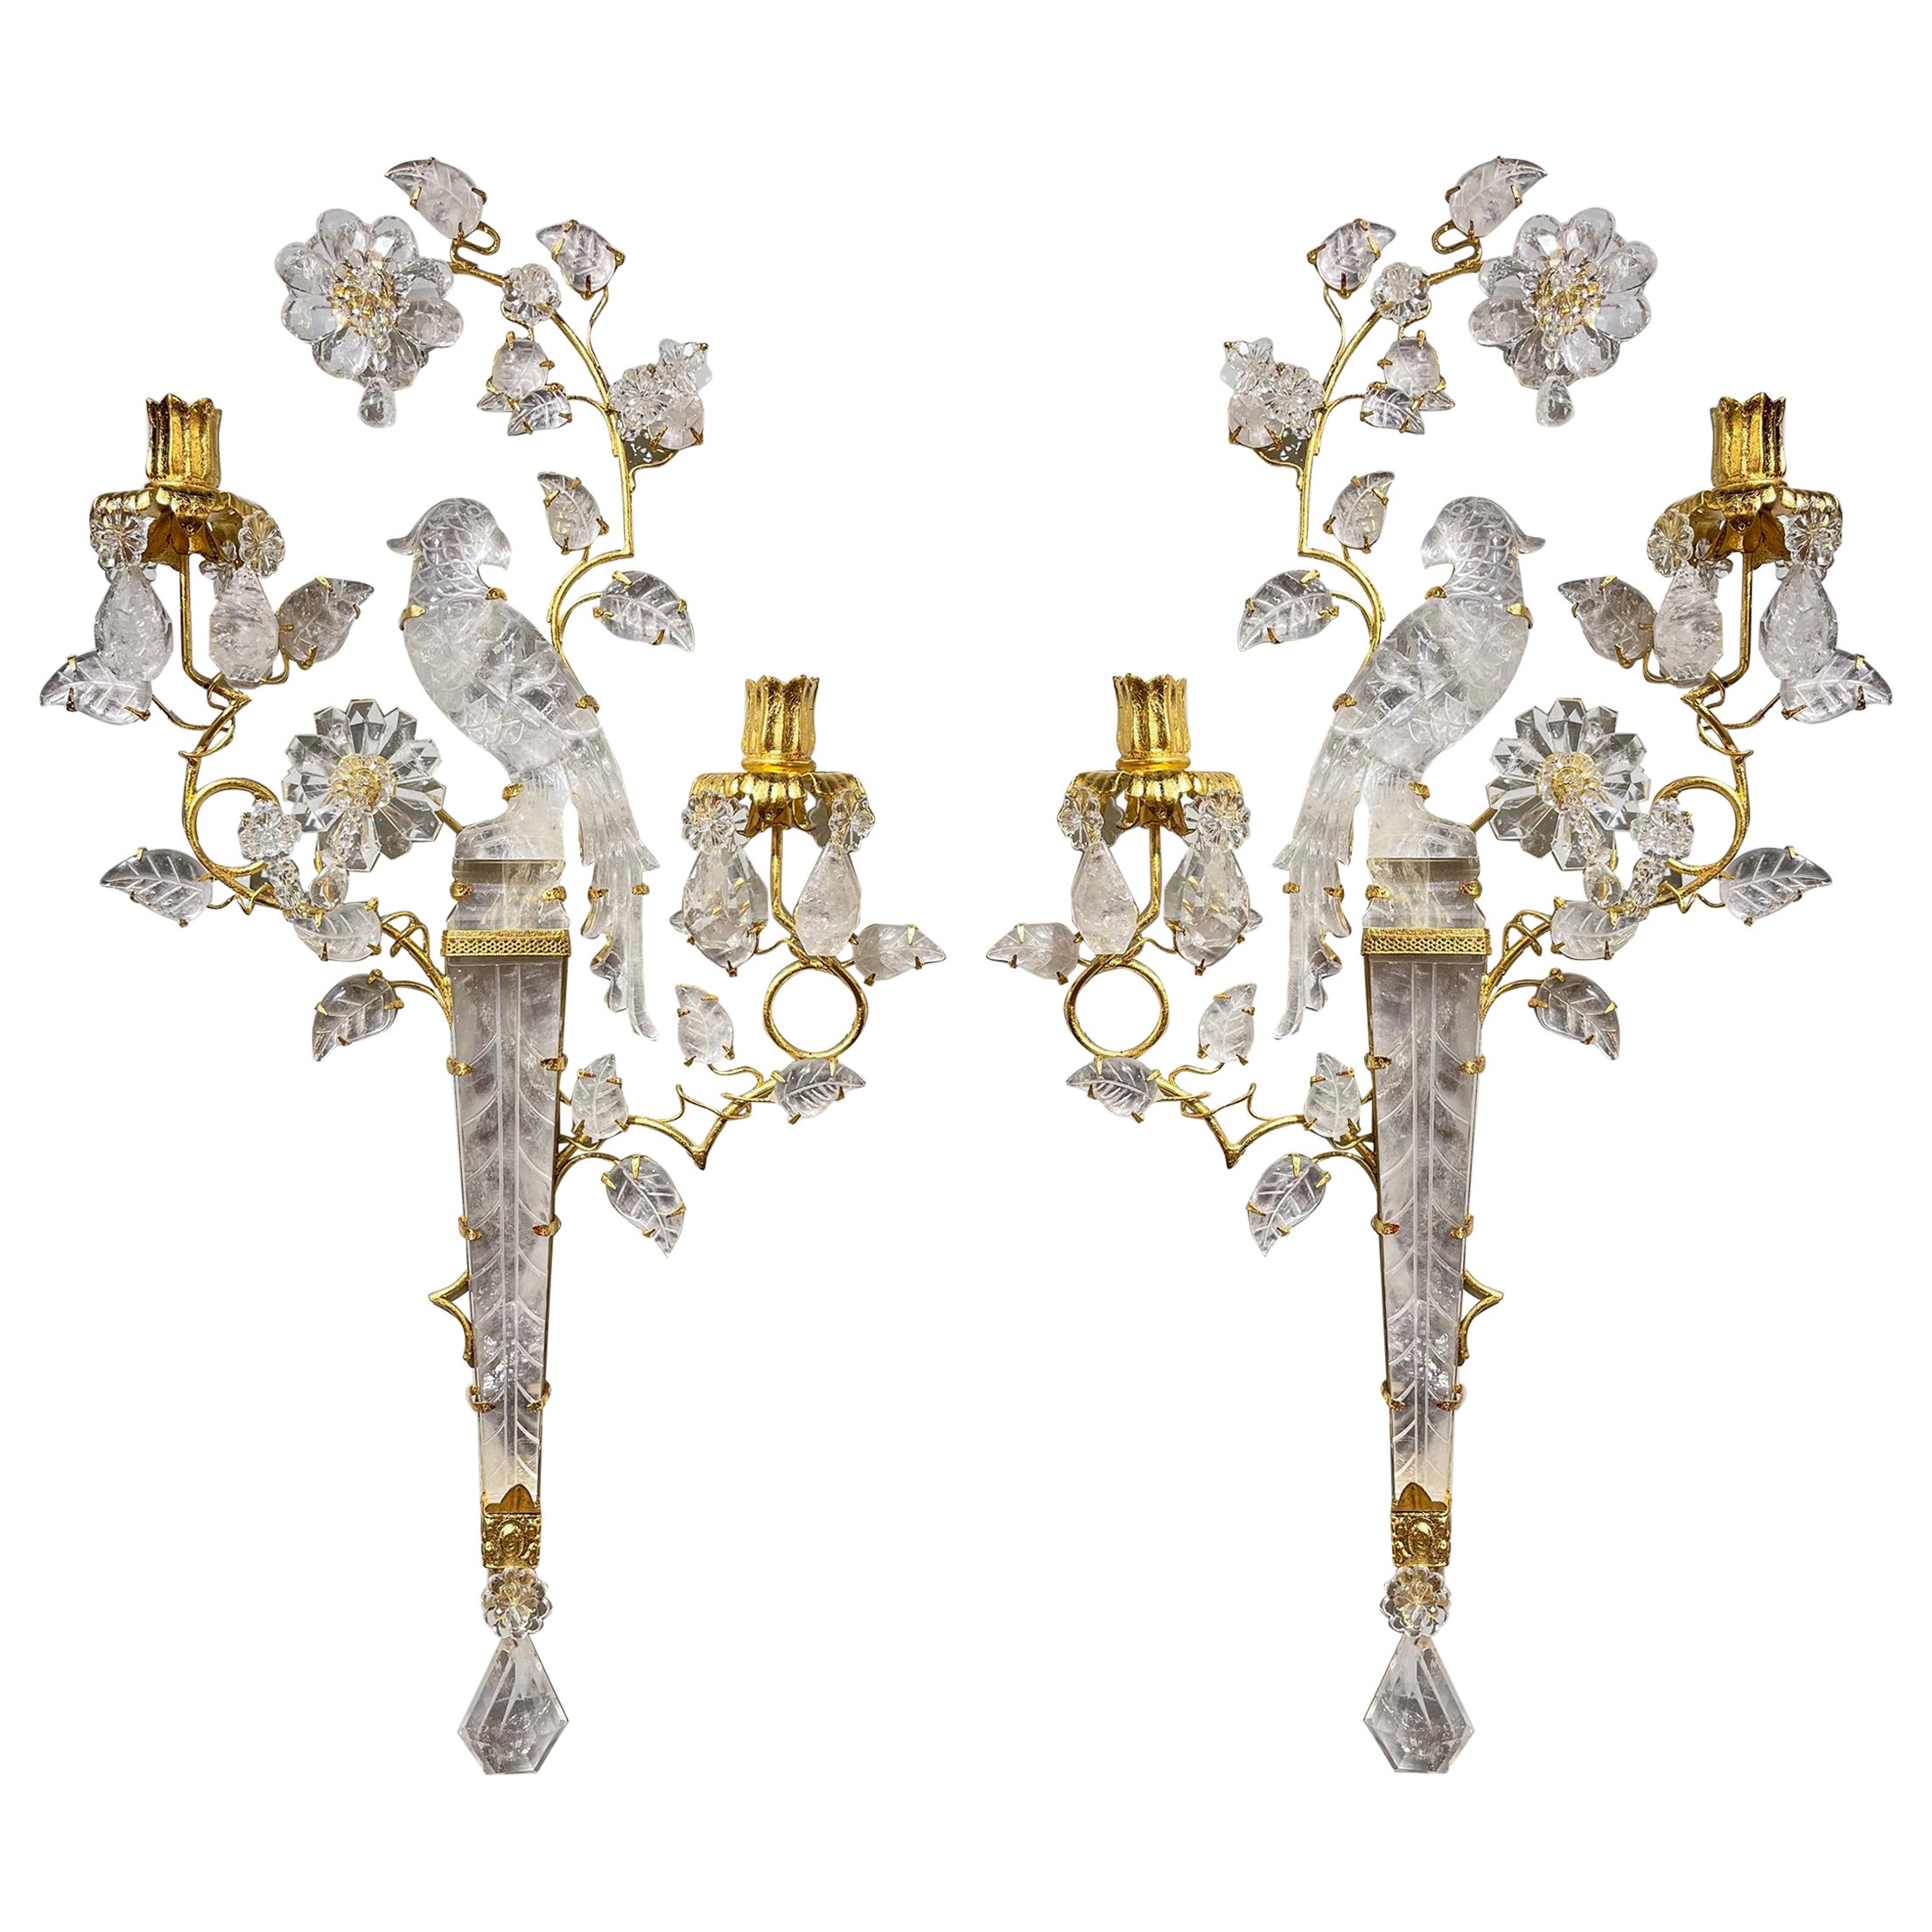 Pair of opulent Uccello sconces in cut crystal and gilt bronze. Each sconce contains two lights with gilt bronze flower sockets resting on gilt bronze branches emerging from the bird's inverted obelisk perch which has beed etched with a leaf vein